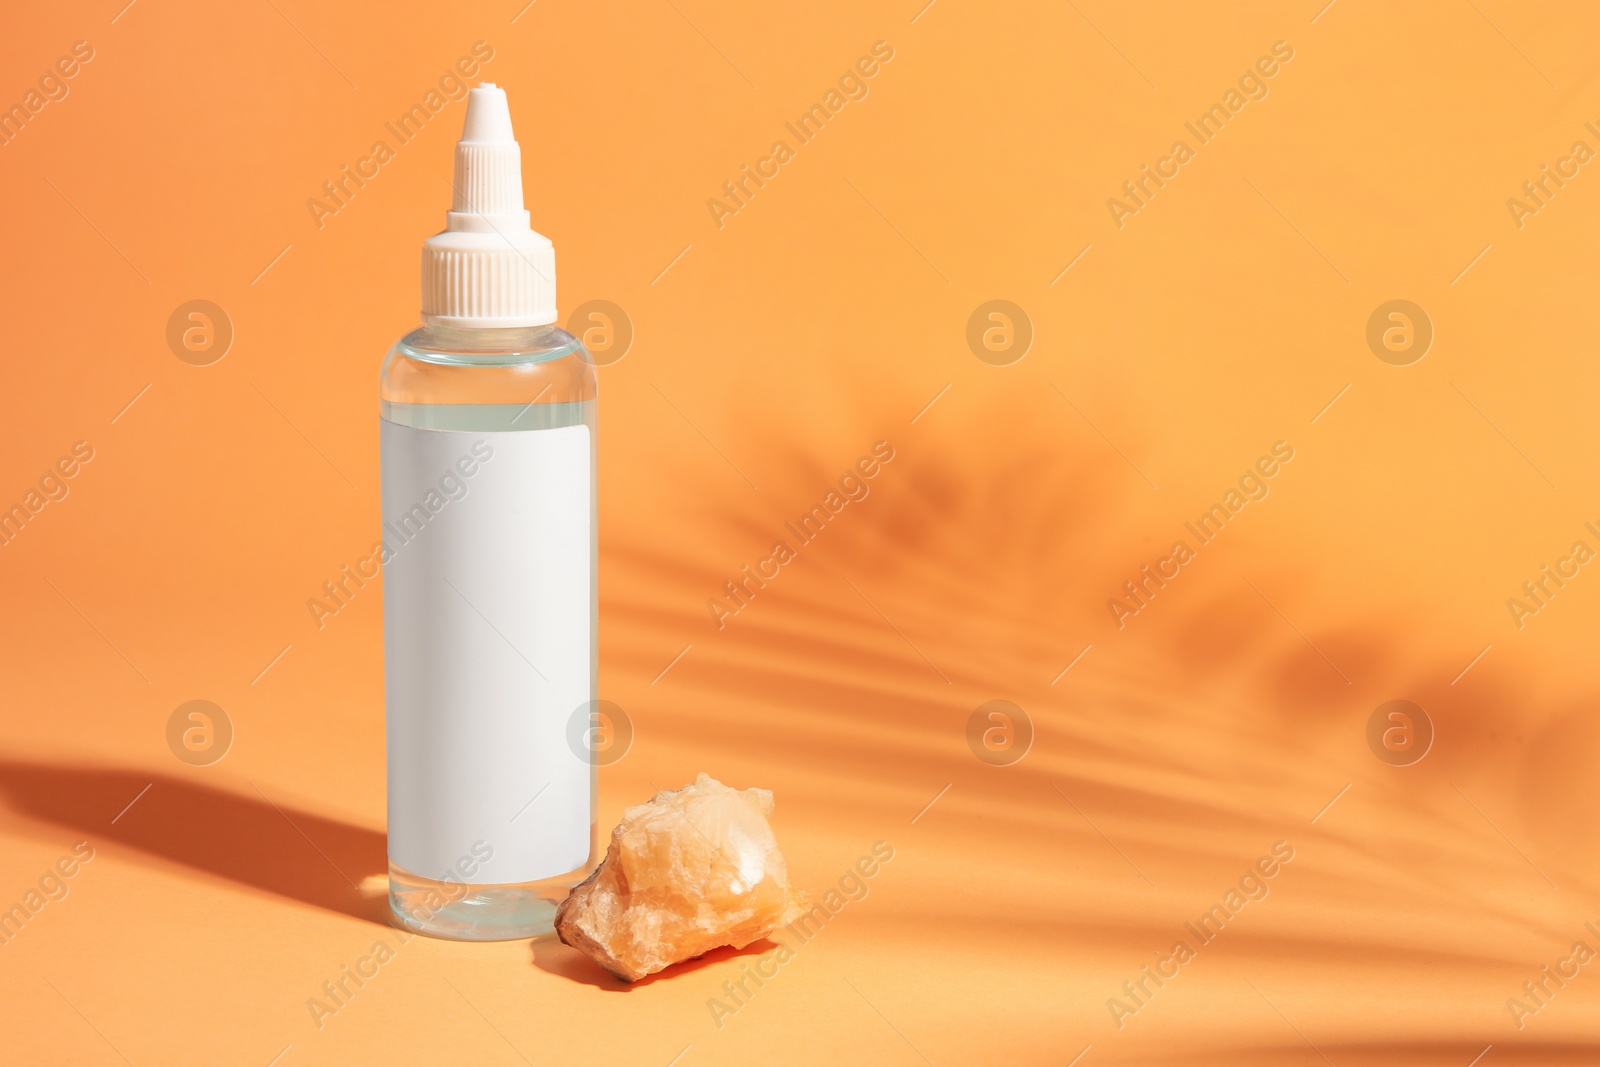 Photo of Cosmetic product and quartz gemstone on orange background, space for text